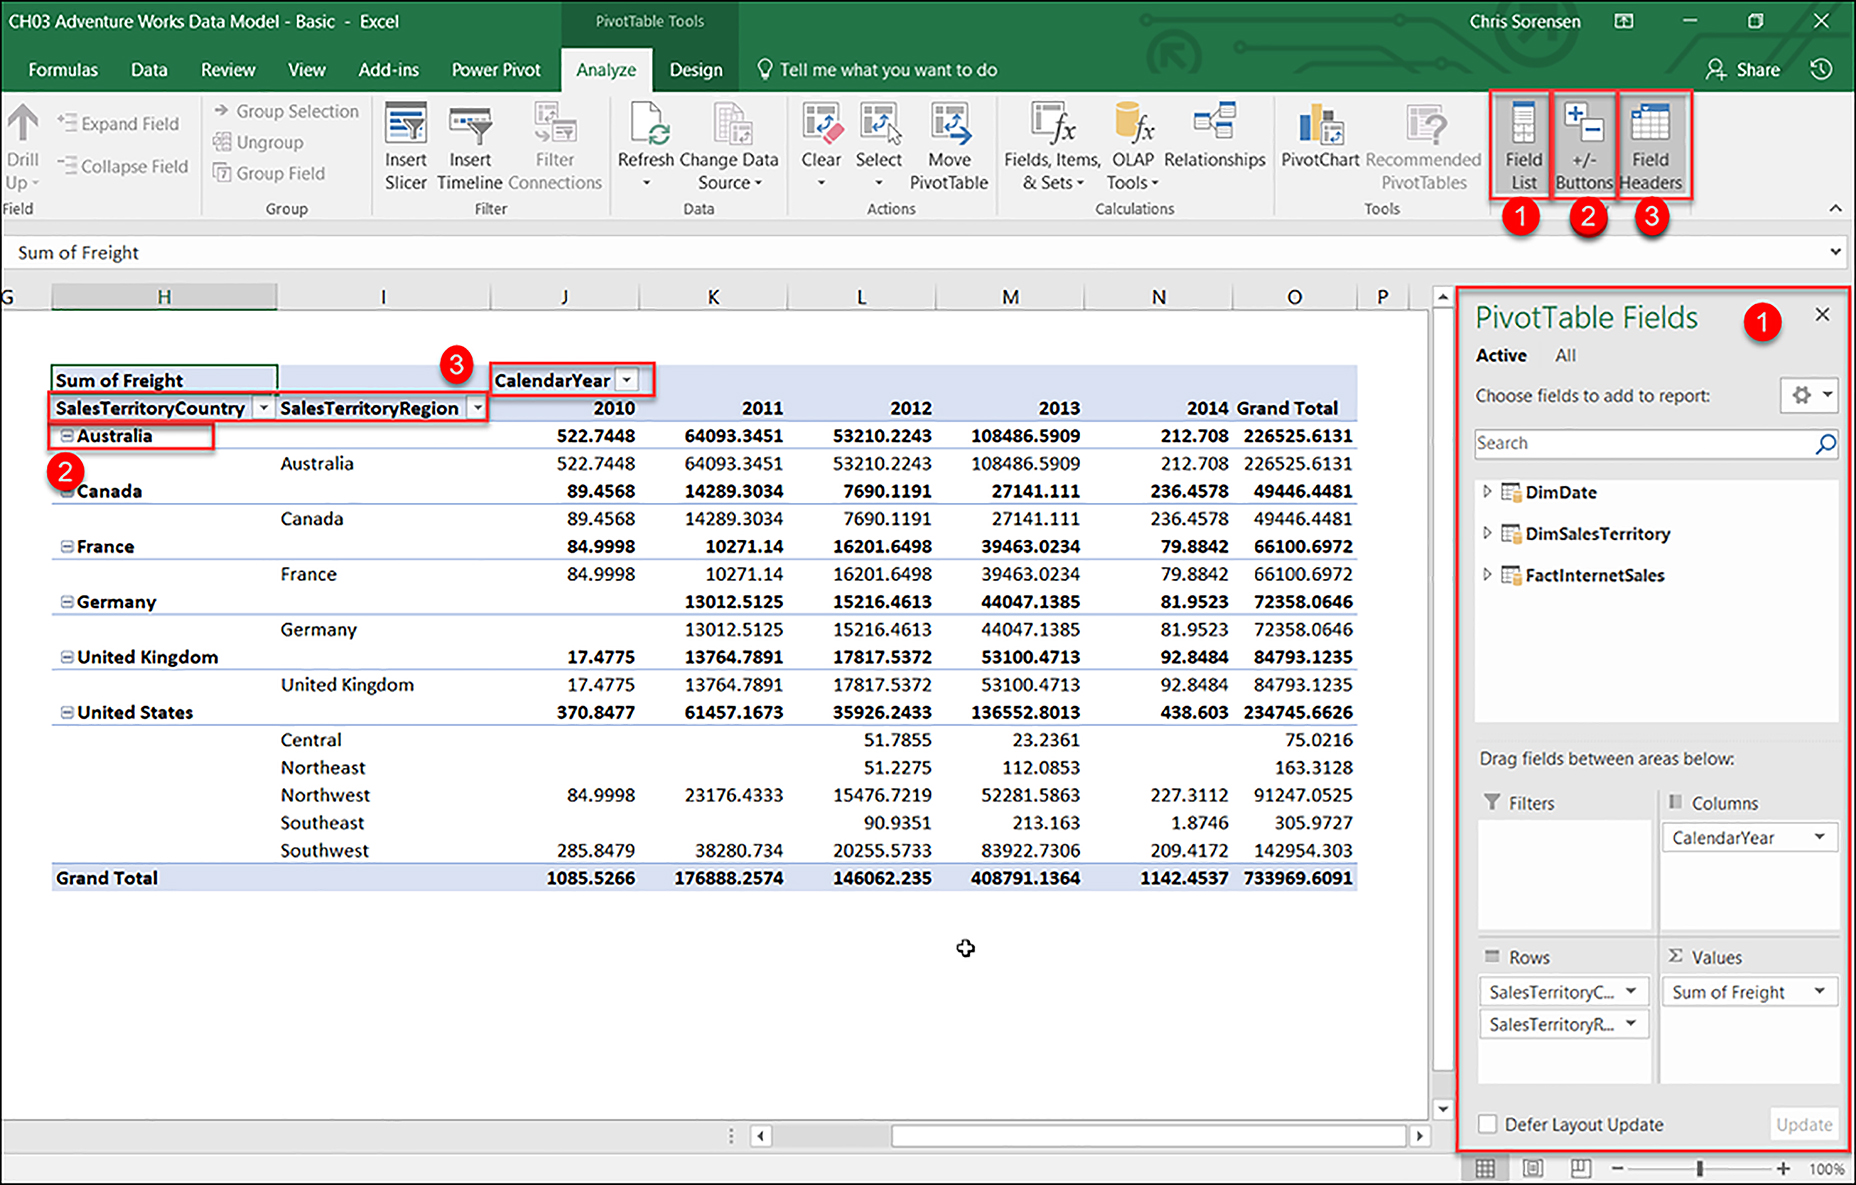 The PivotTable Interface and how it will react to the toggle commands in the Show groups. We are demoing which buttons can be toggled to make different parts of the PivotTable turn on and off.